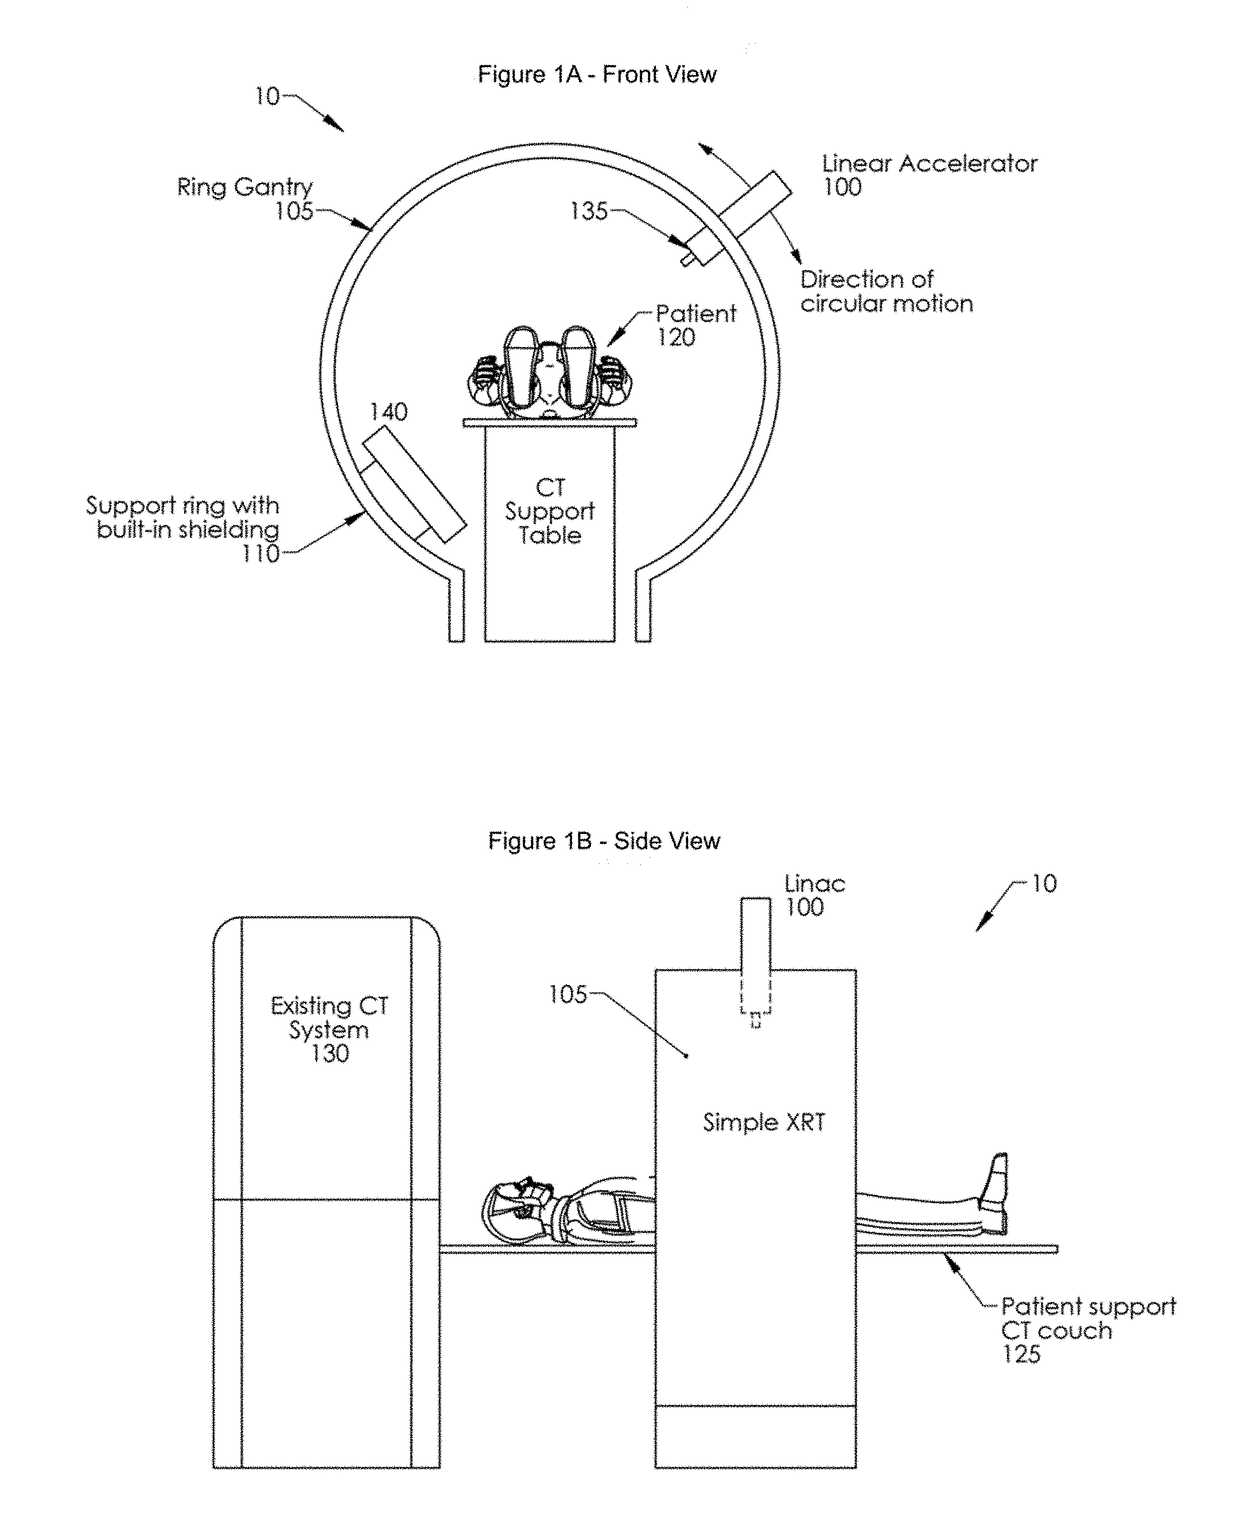 Self-Shielded Image Guided Radiation Oncology System